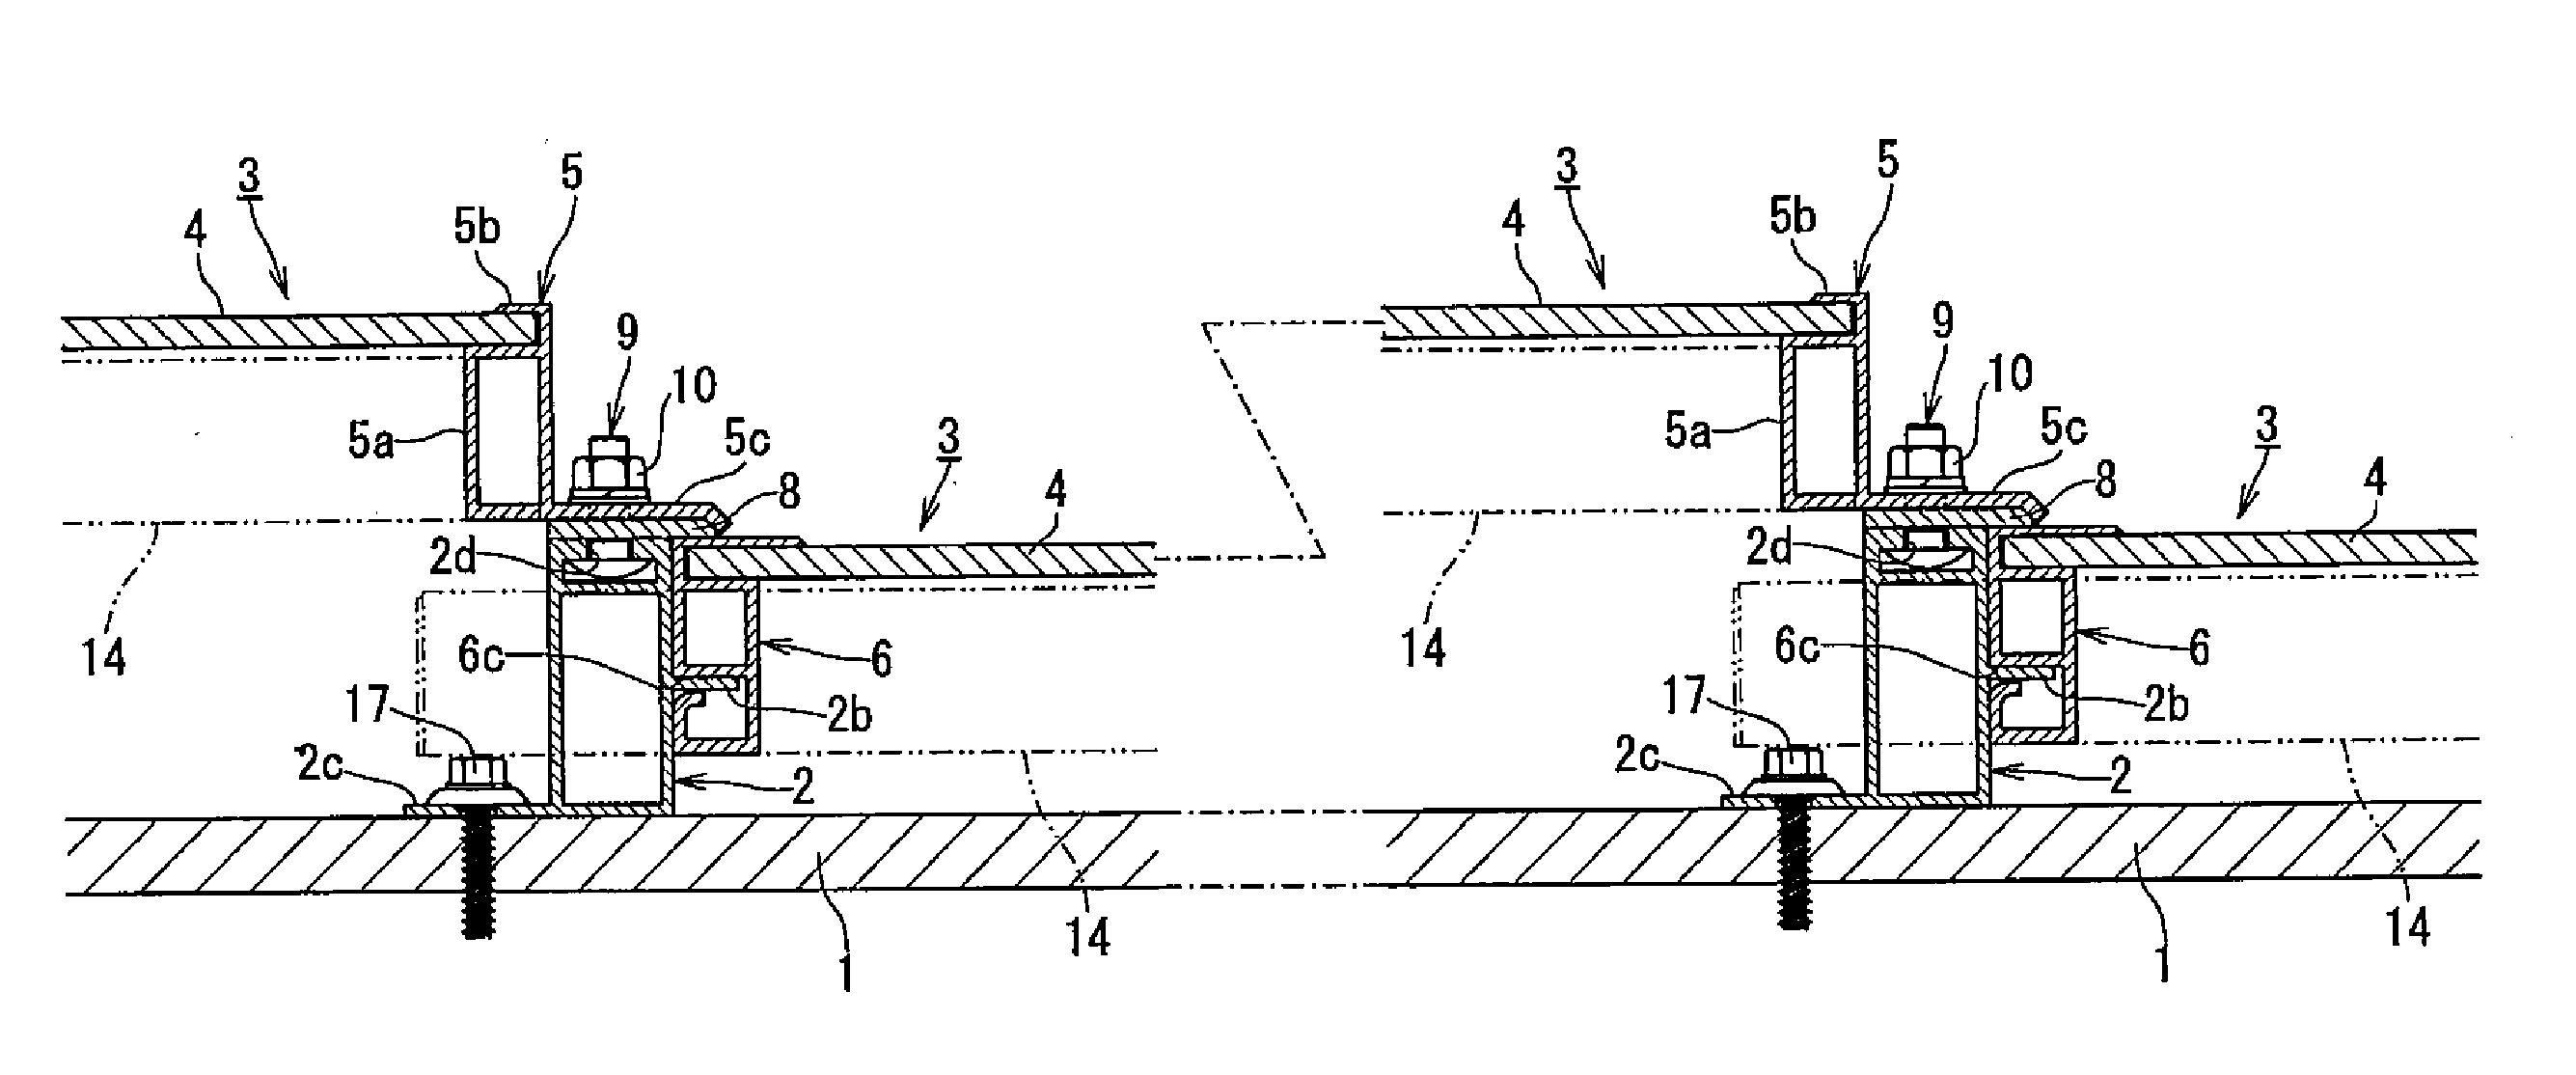 Installation structure of solar cell module